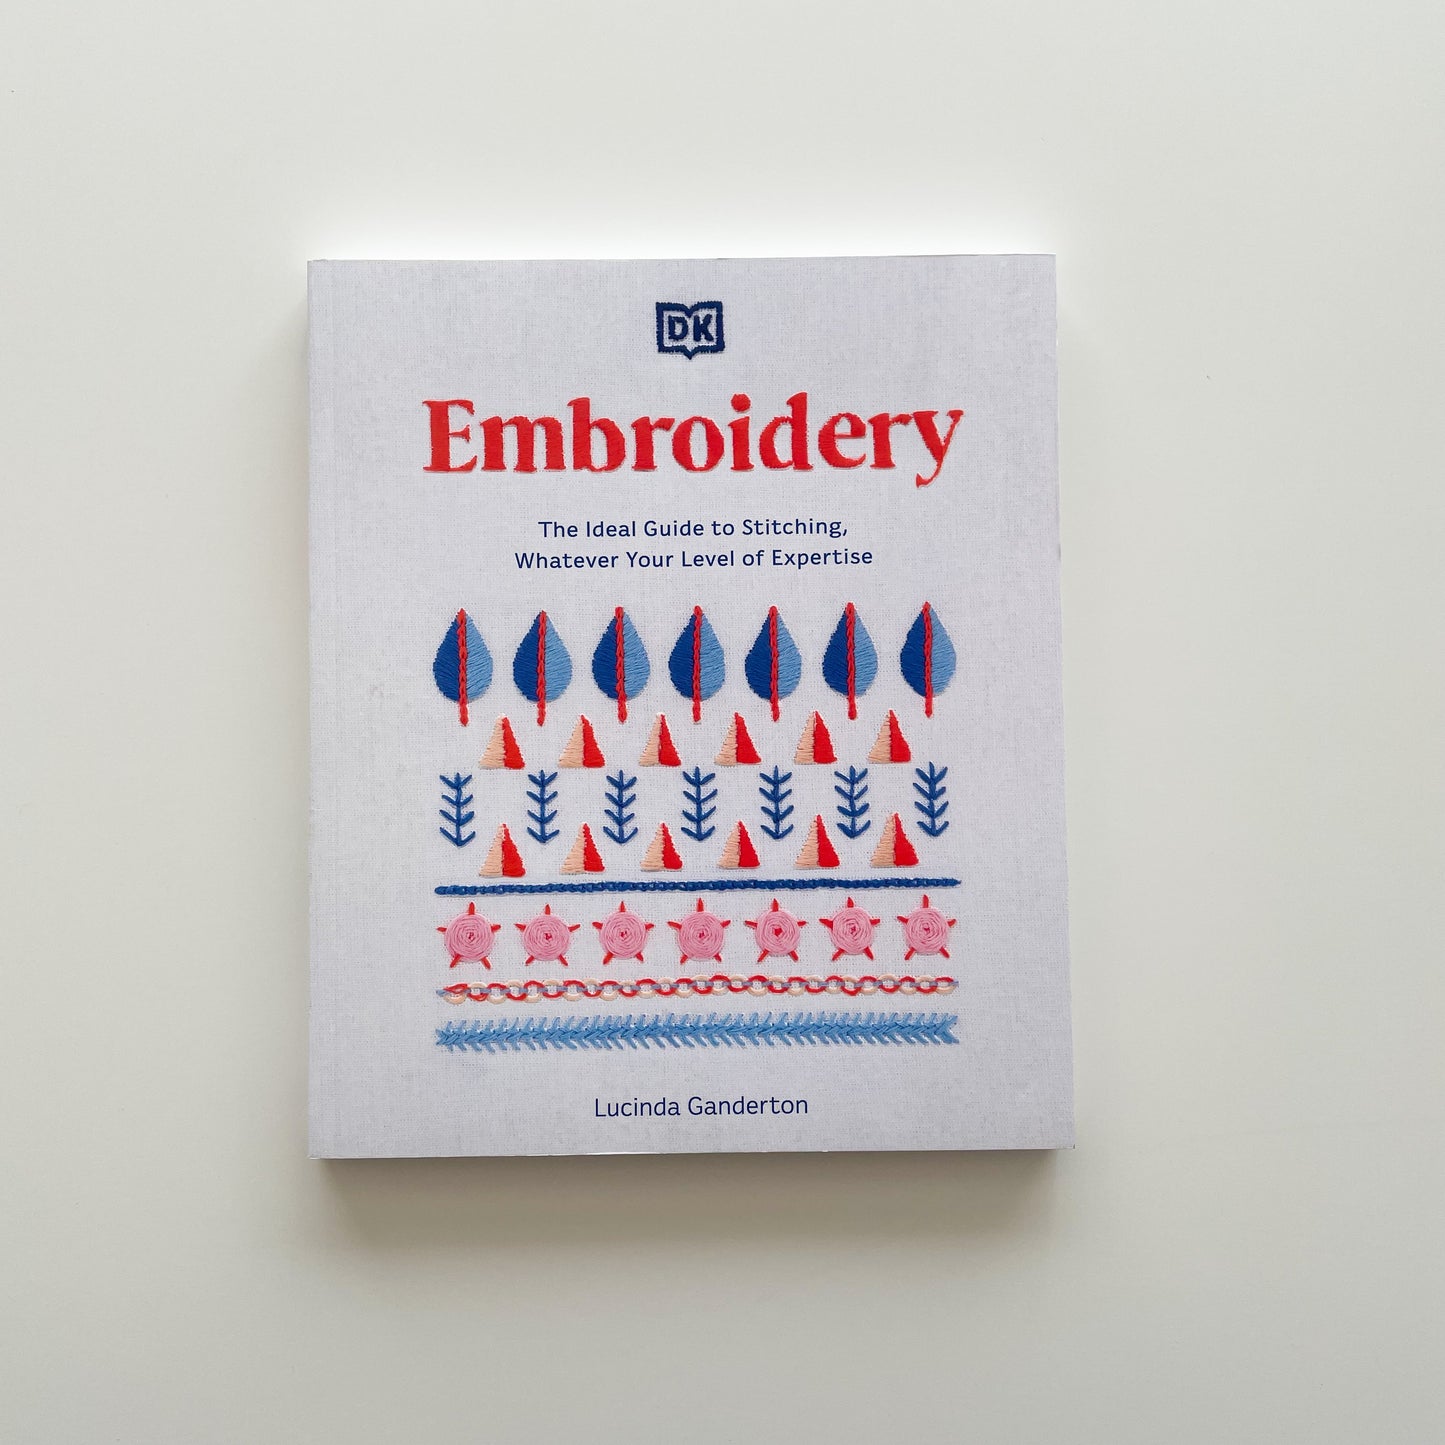 DK Embroidery: The Ideal Guide to Stitching, Whatever Your Level of Expertise